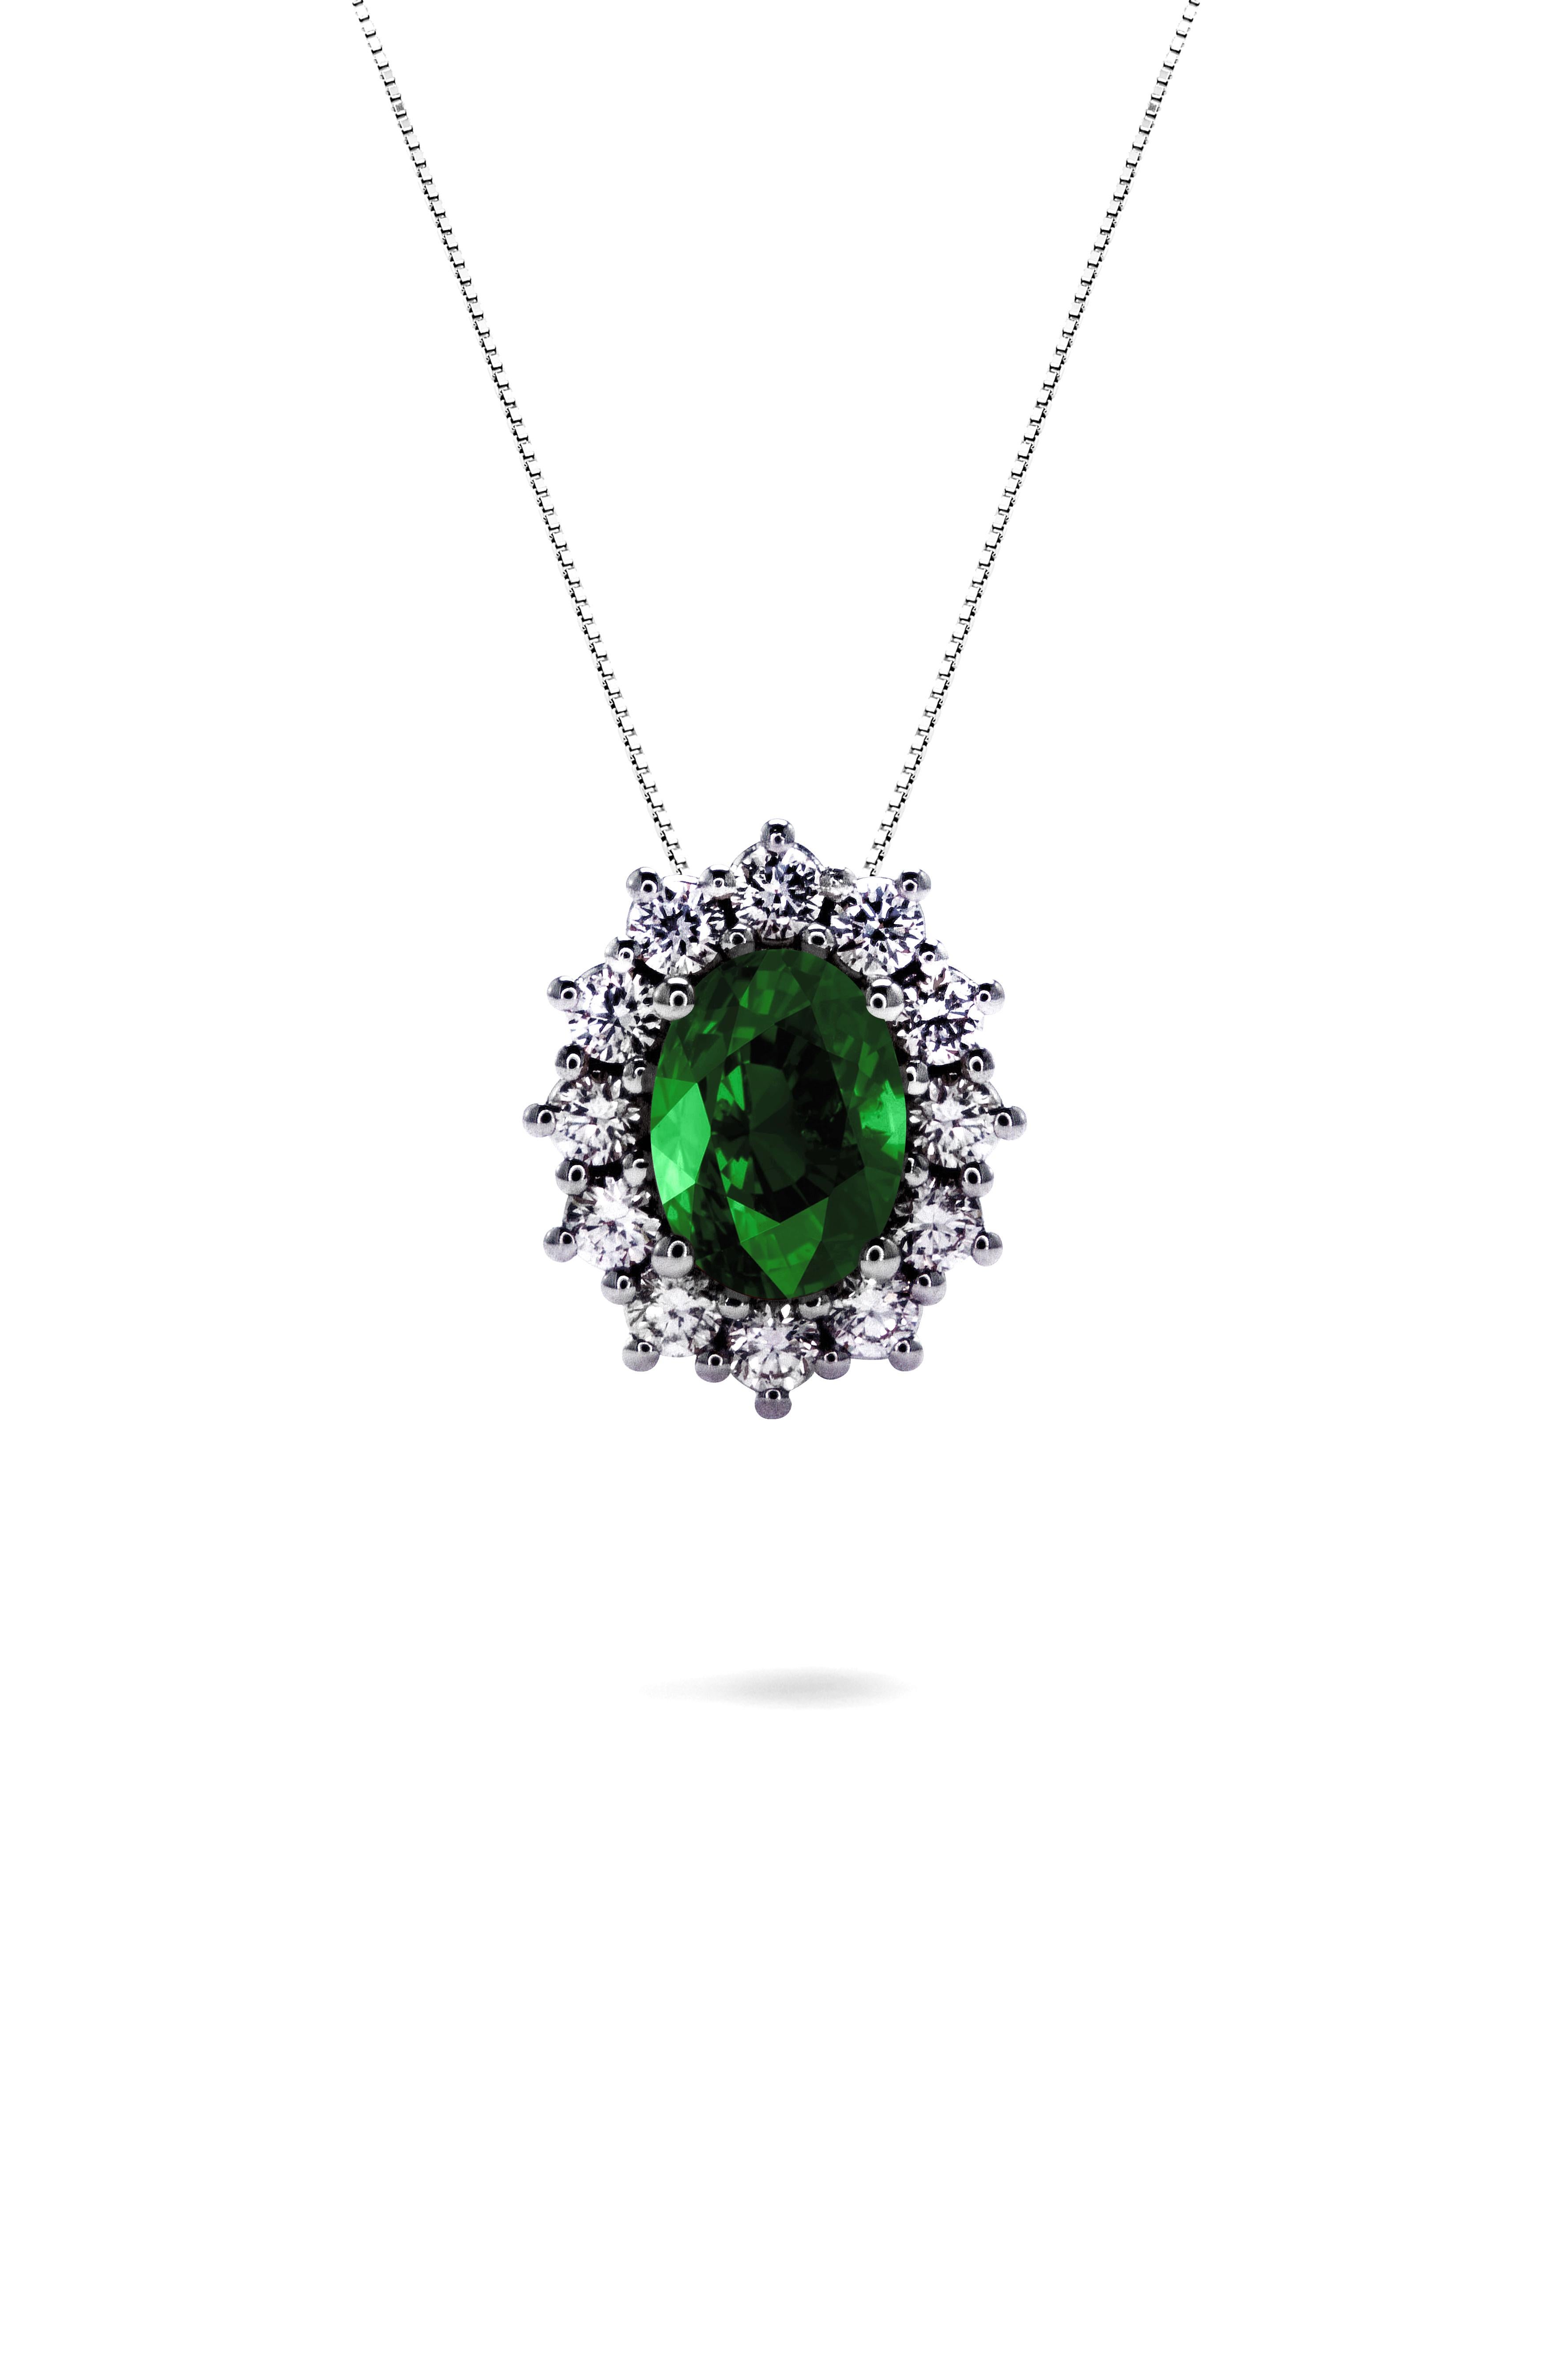 This Green Emerald and Diamond Sunflower pendant necklace, is set in 18Kt White Gold and from the Sunflower Chic collection. 

The Sunflower design to this pendant sets the 0.76 carat Emerald in the bud and surrounds it with 12 diamond petals